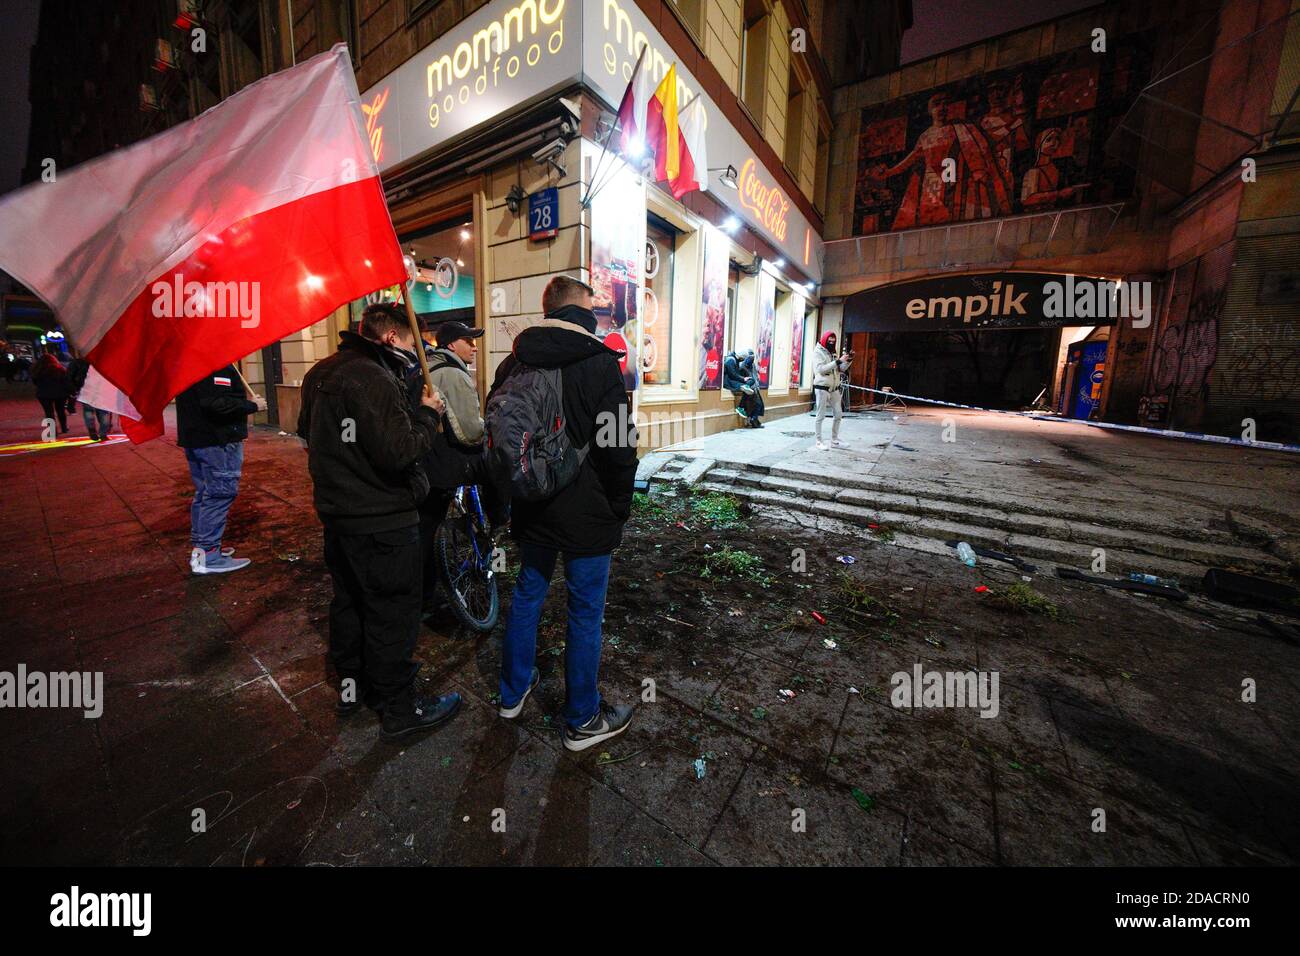 People stand in front of a vandalised Empik book store in central Warsaw,  Poland on November 11, 2020. Despite the intention of Independence Day  march organizers to hold a parade solely by